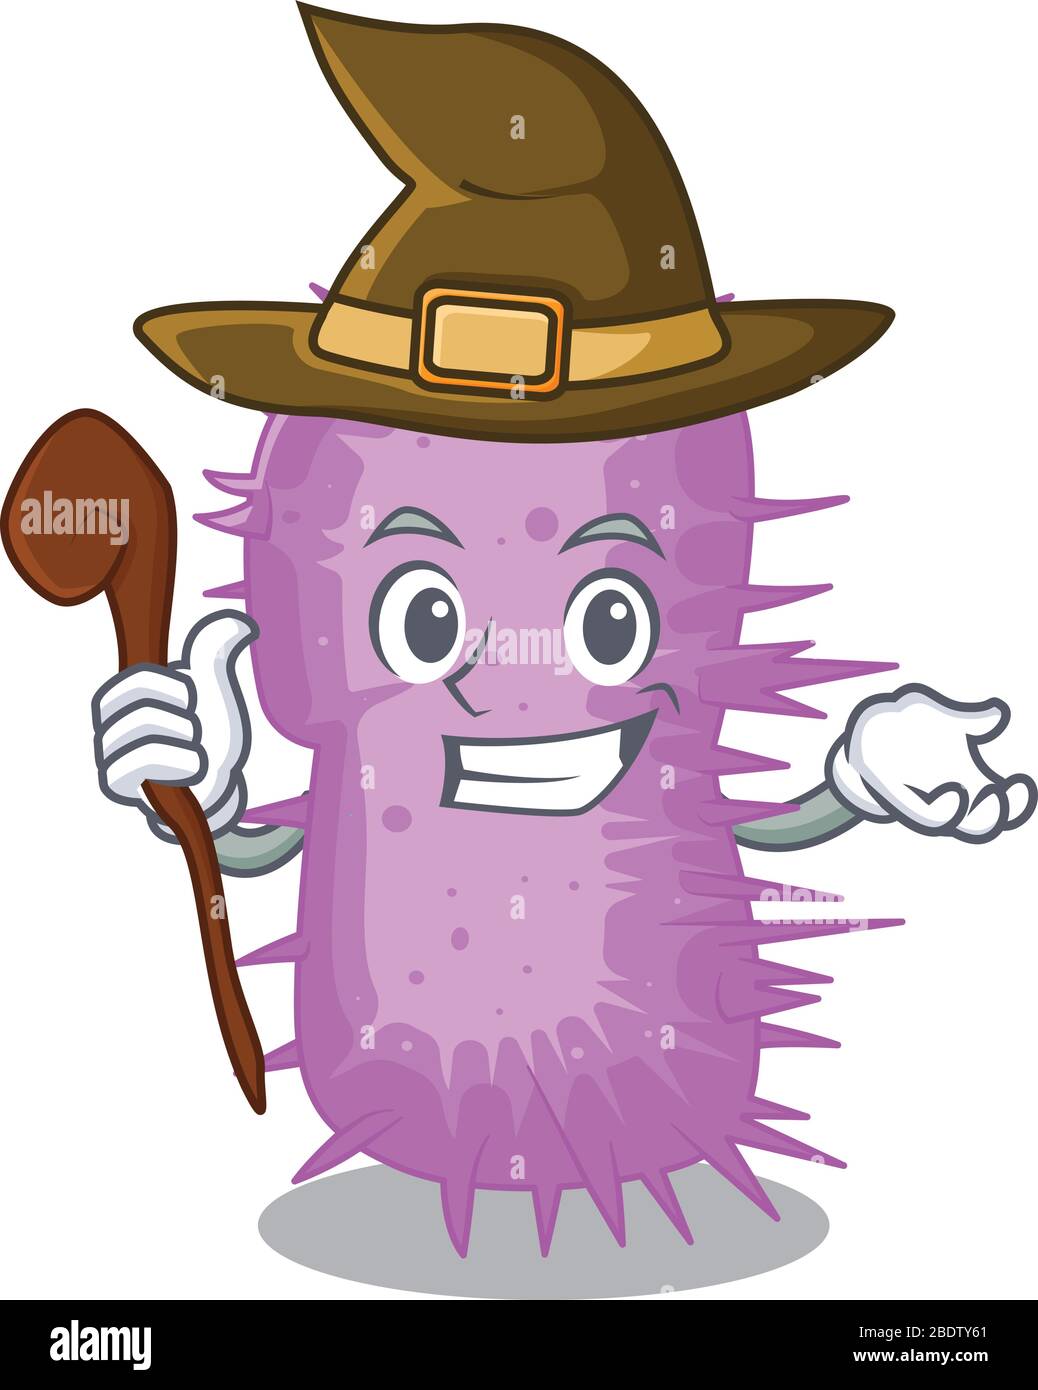 Acinetobacter baumannii sneaky and tricky witch cartoon character Stock Vector